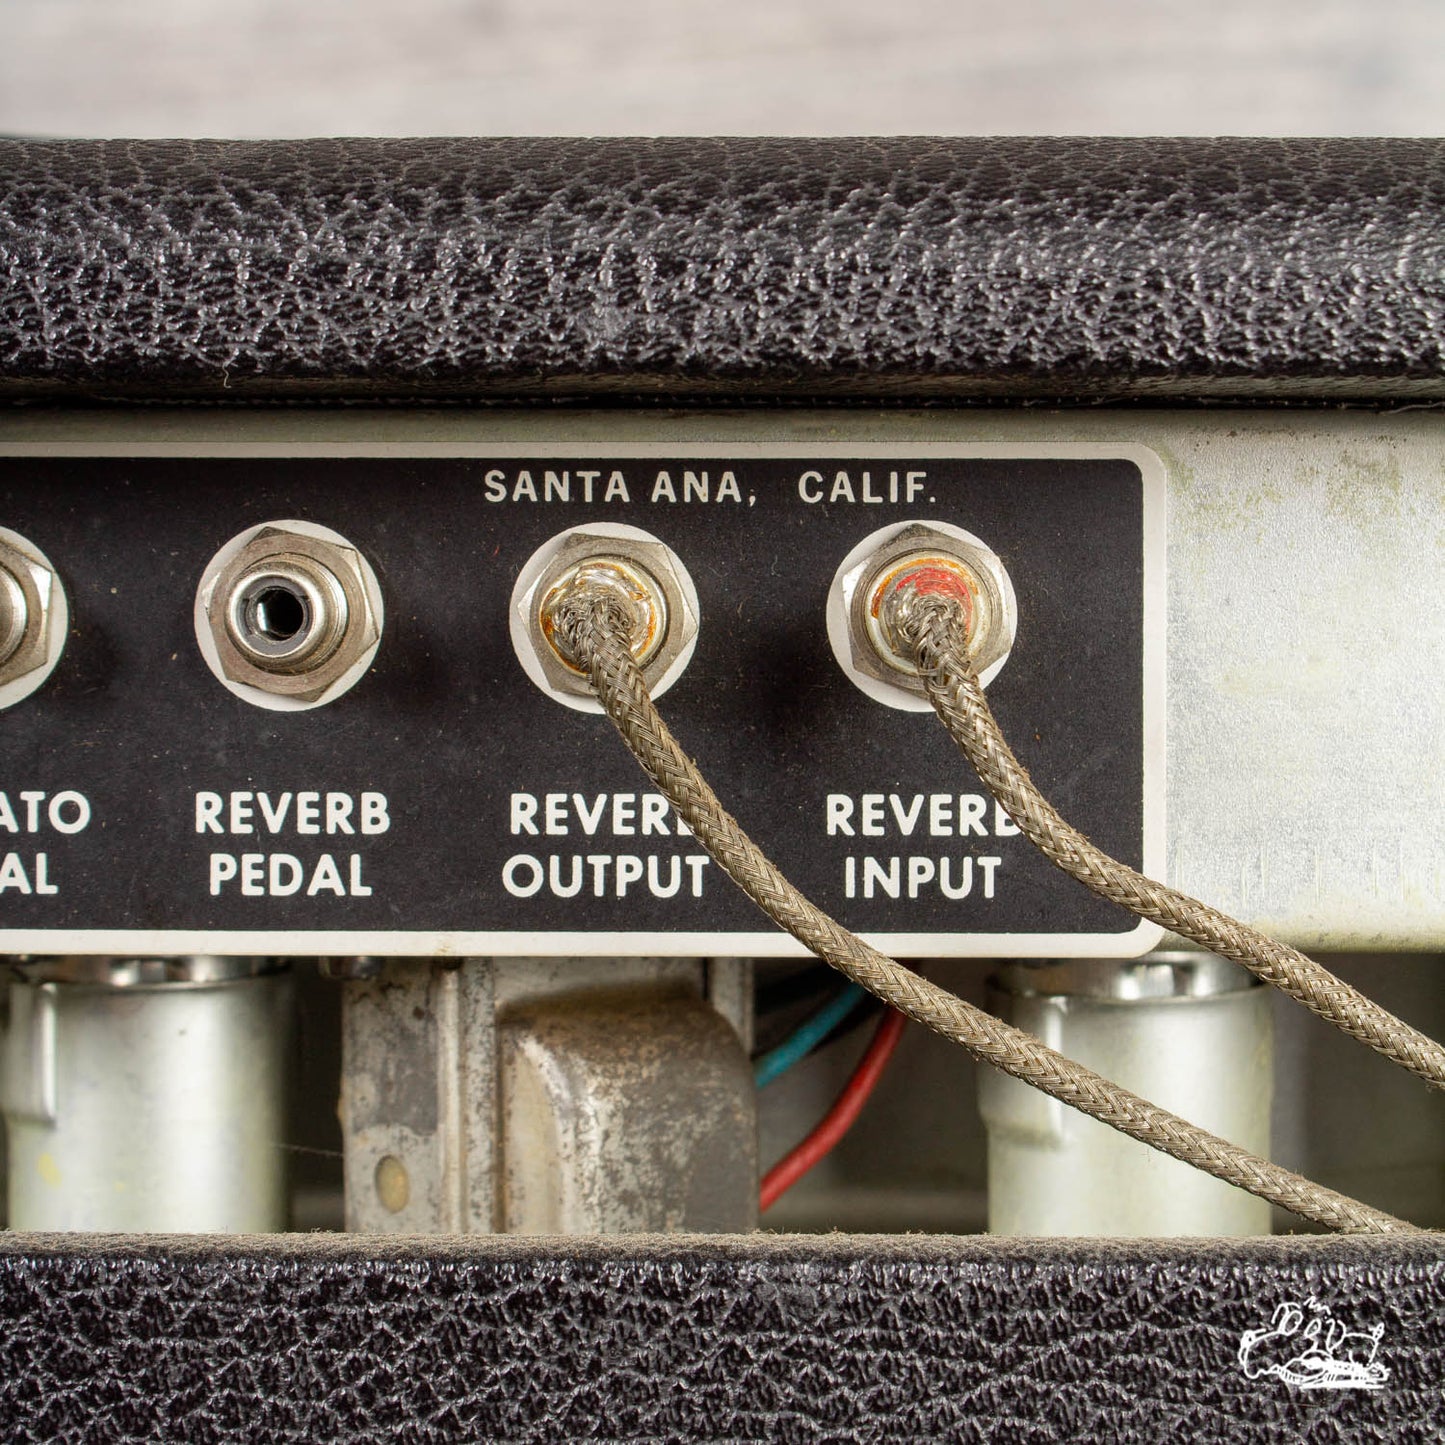 1967 Fender Super Reverb with Original Cover - Silverface